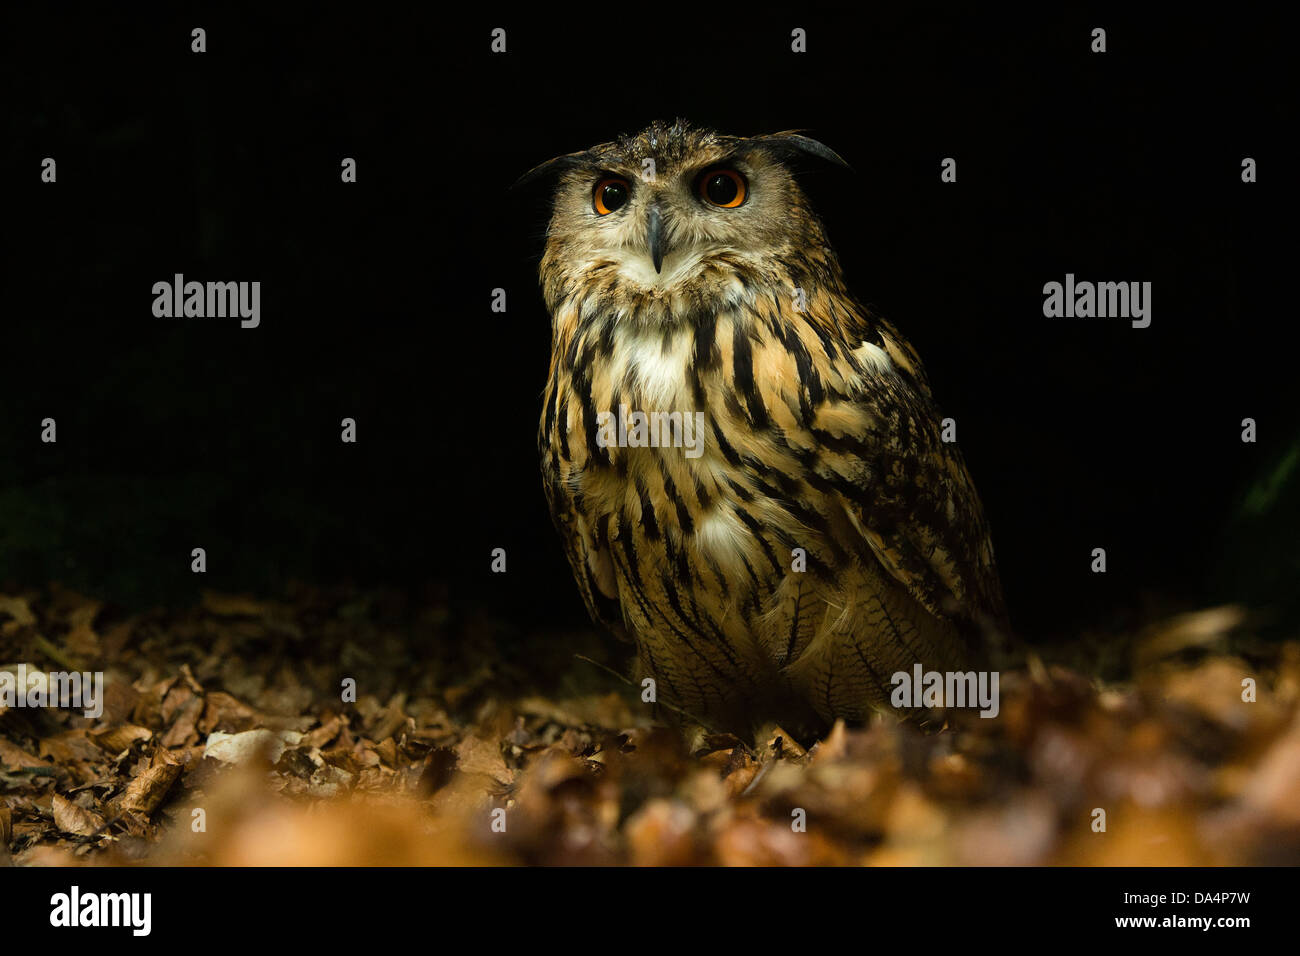 Eurasian Eagle Owl (Bubo Bubo) on a forest floor at night Stock Photo